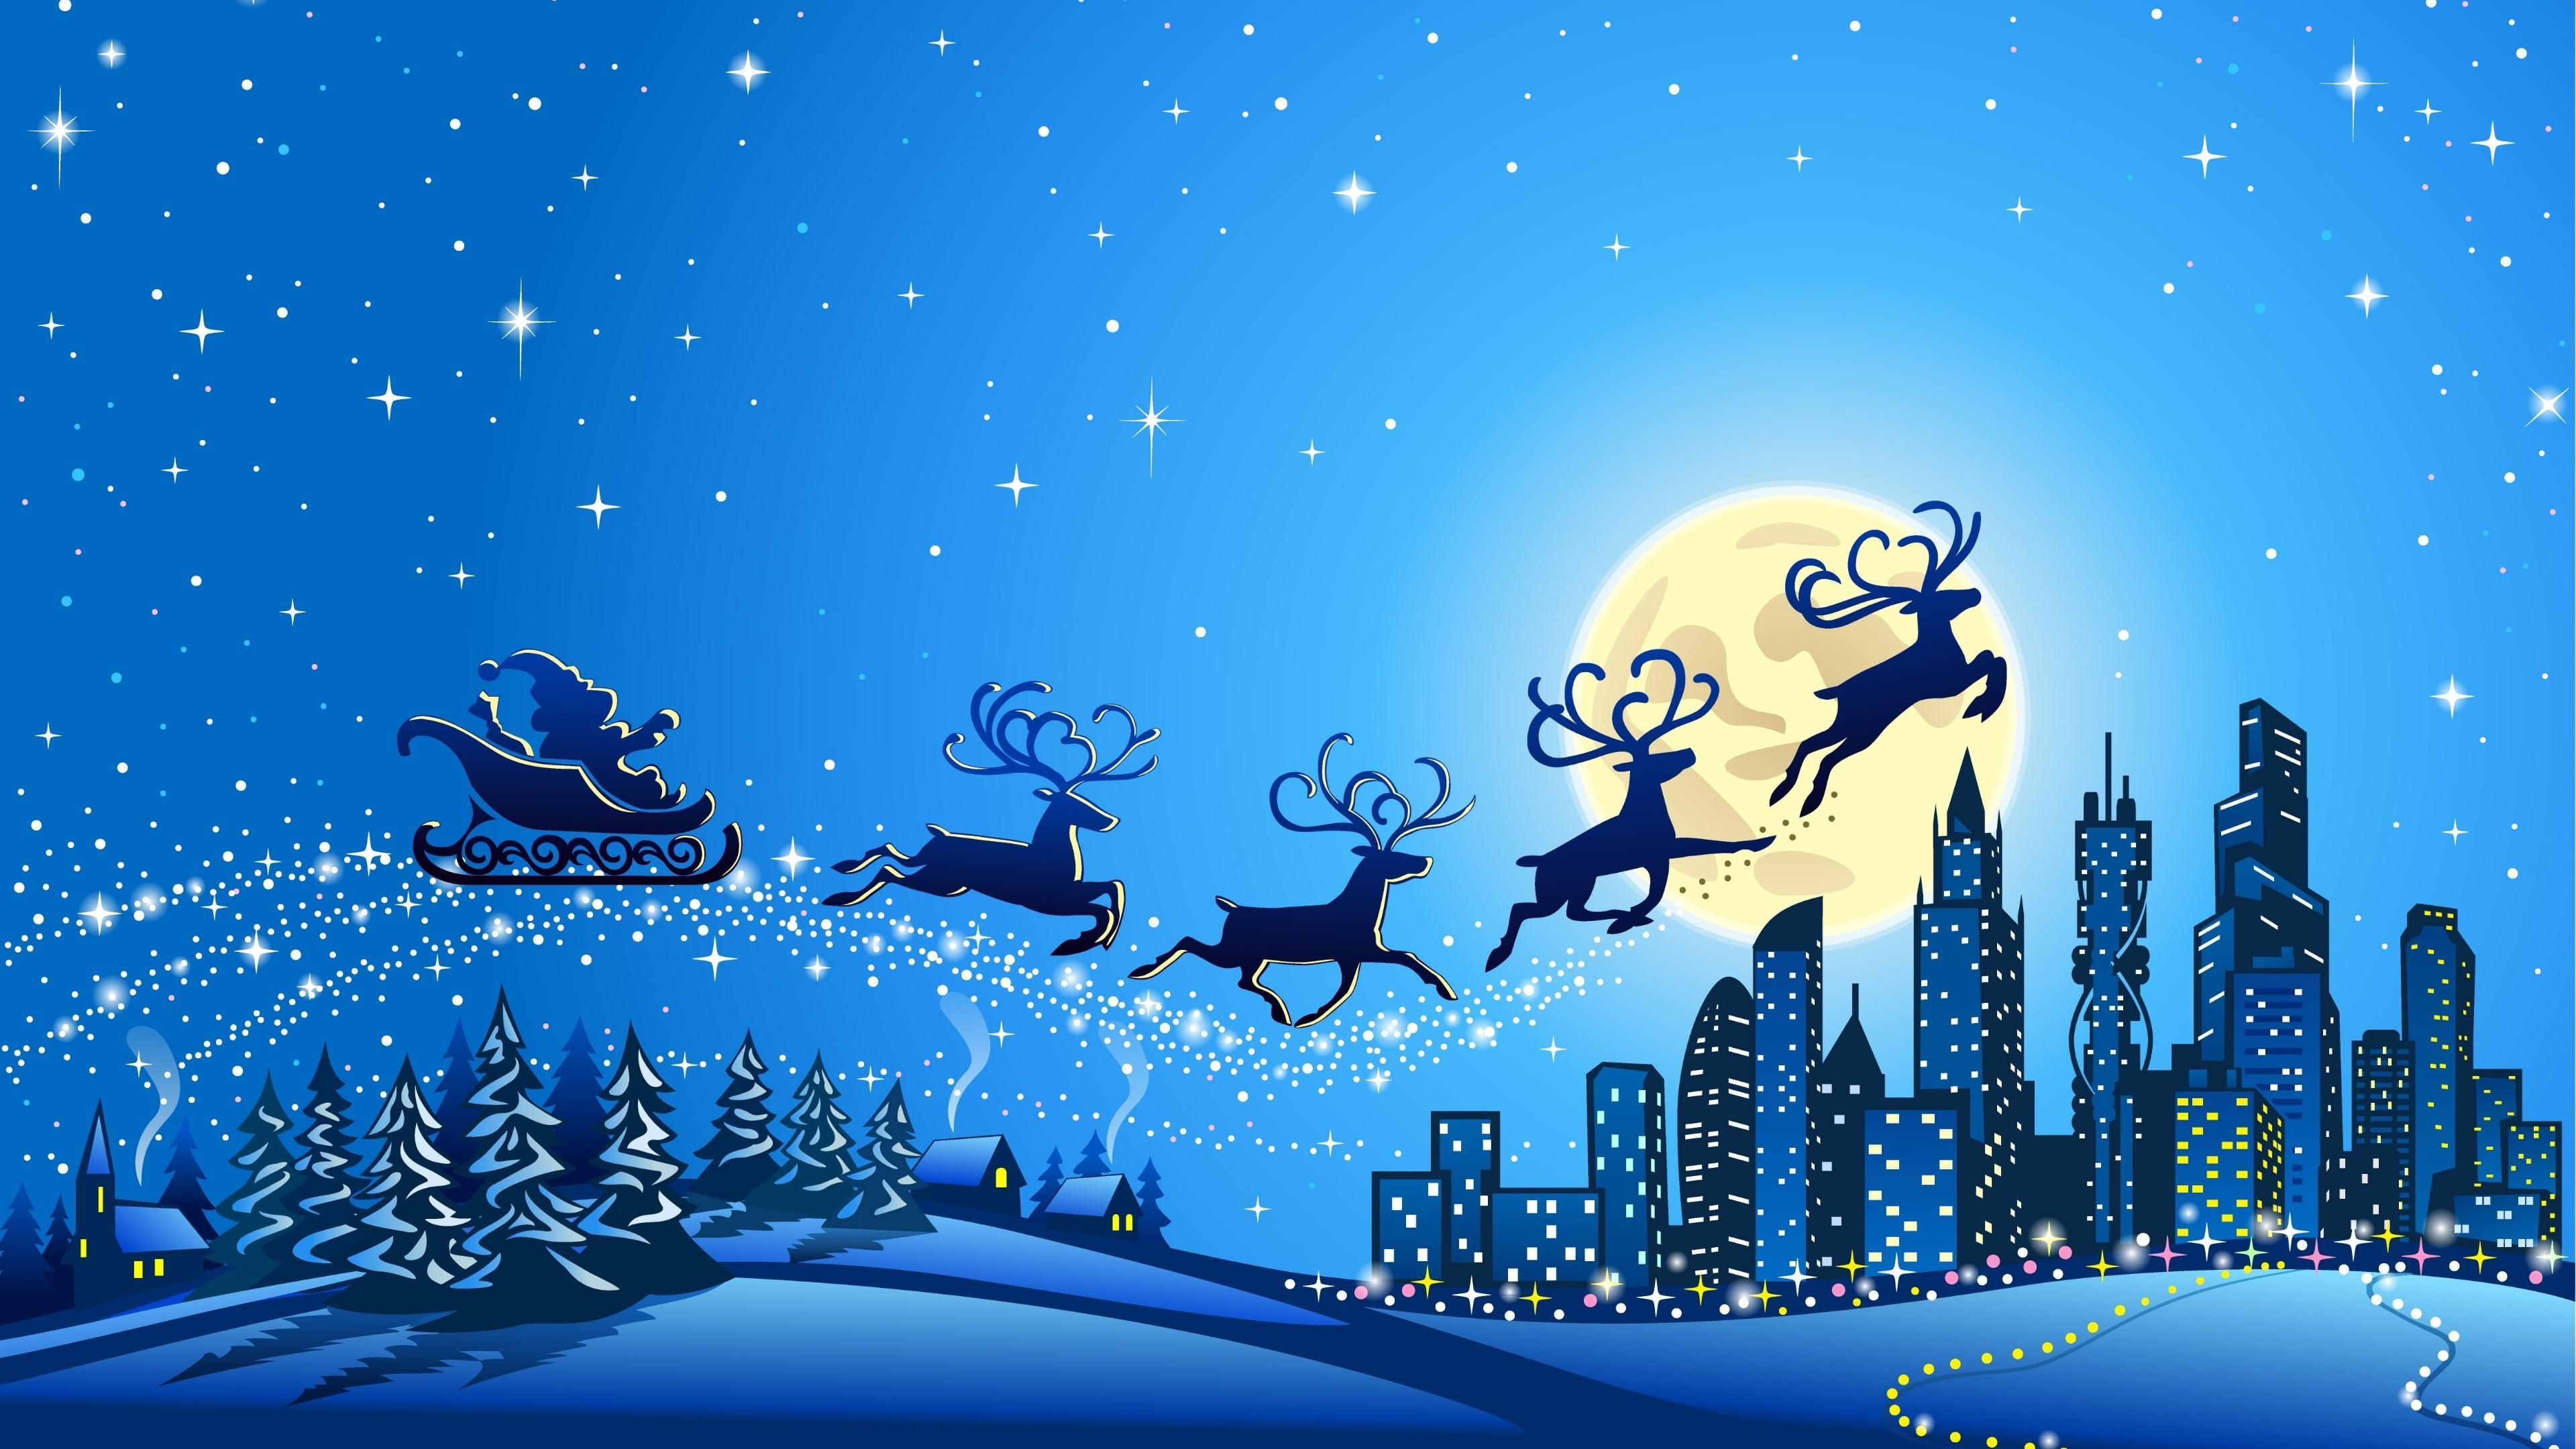 2015 merry Christmas wallpaper hd - images, photos, pictures, pics